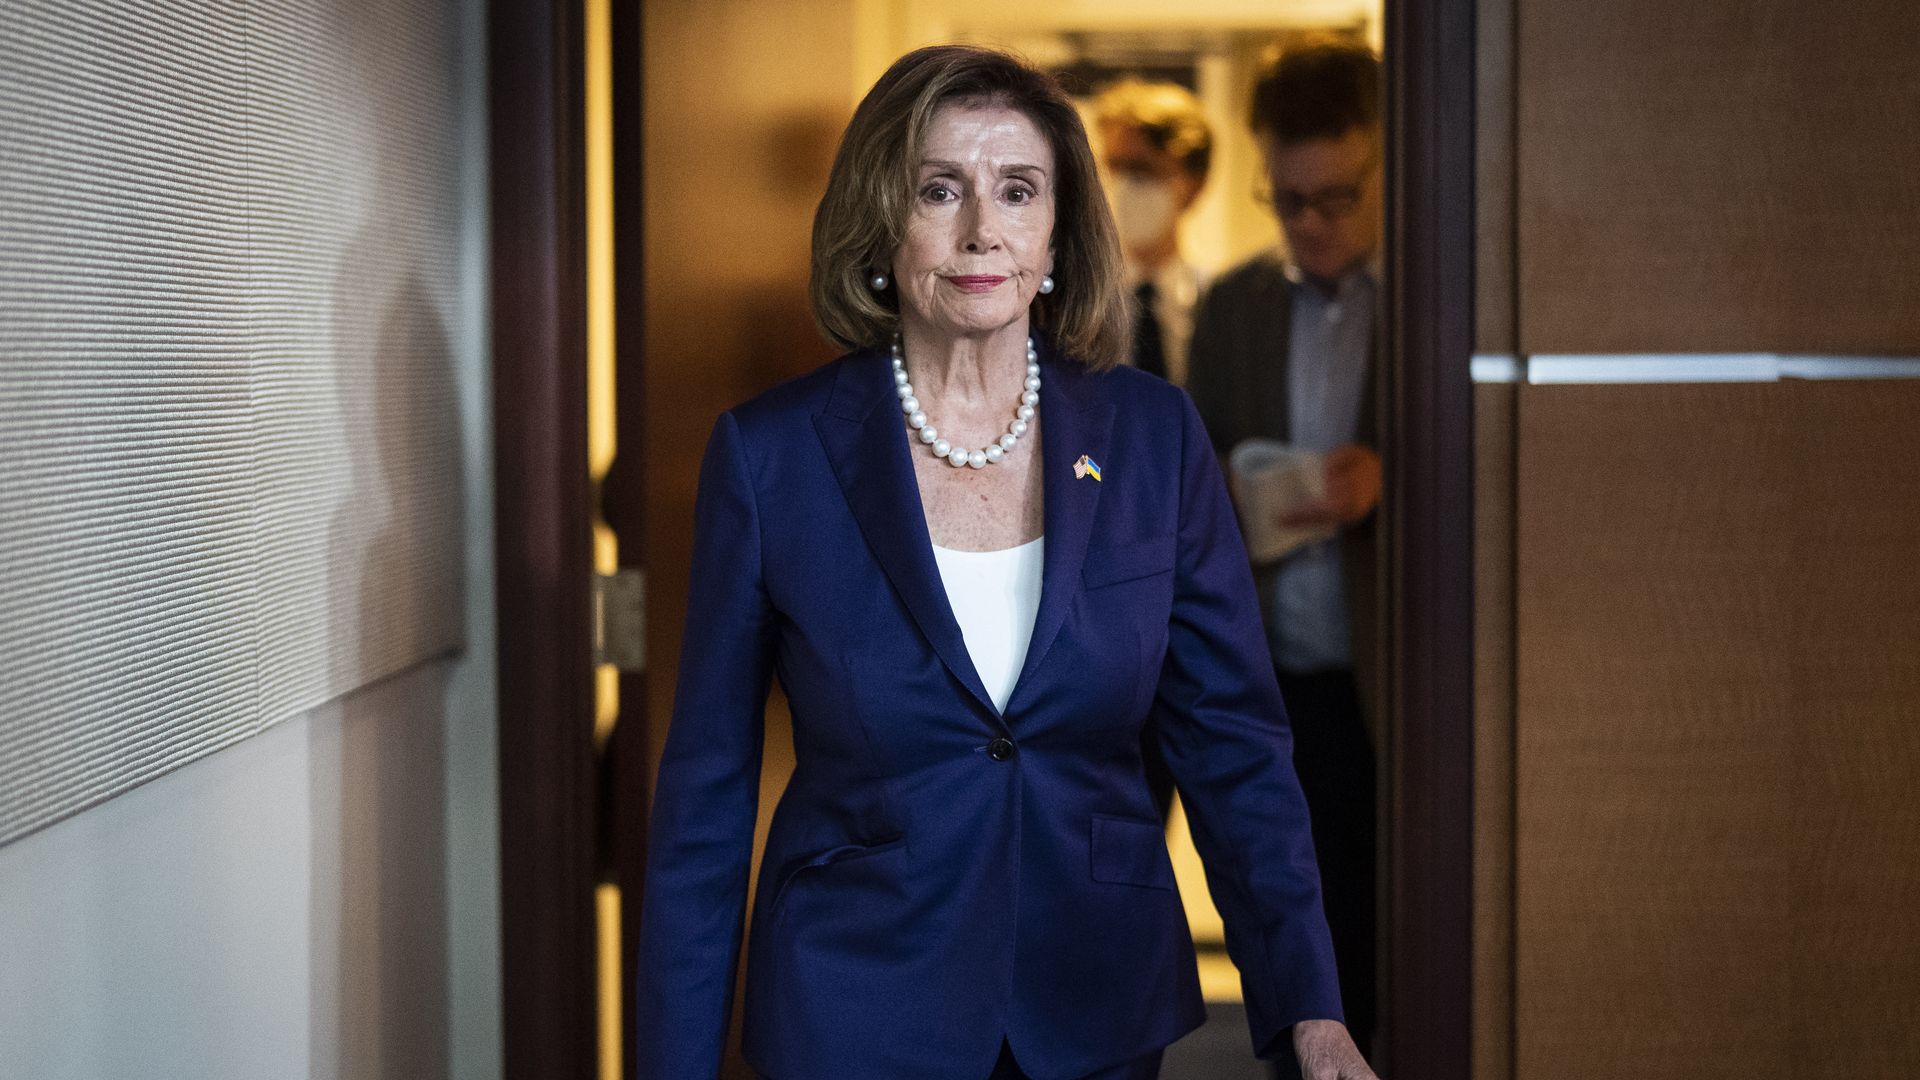 House Speaker Nancy Pelosi, D-Calif., arrives for her weekly press conference on Capitol Hill on Friday, July 29, 2022